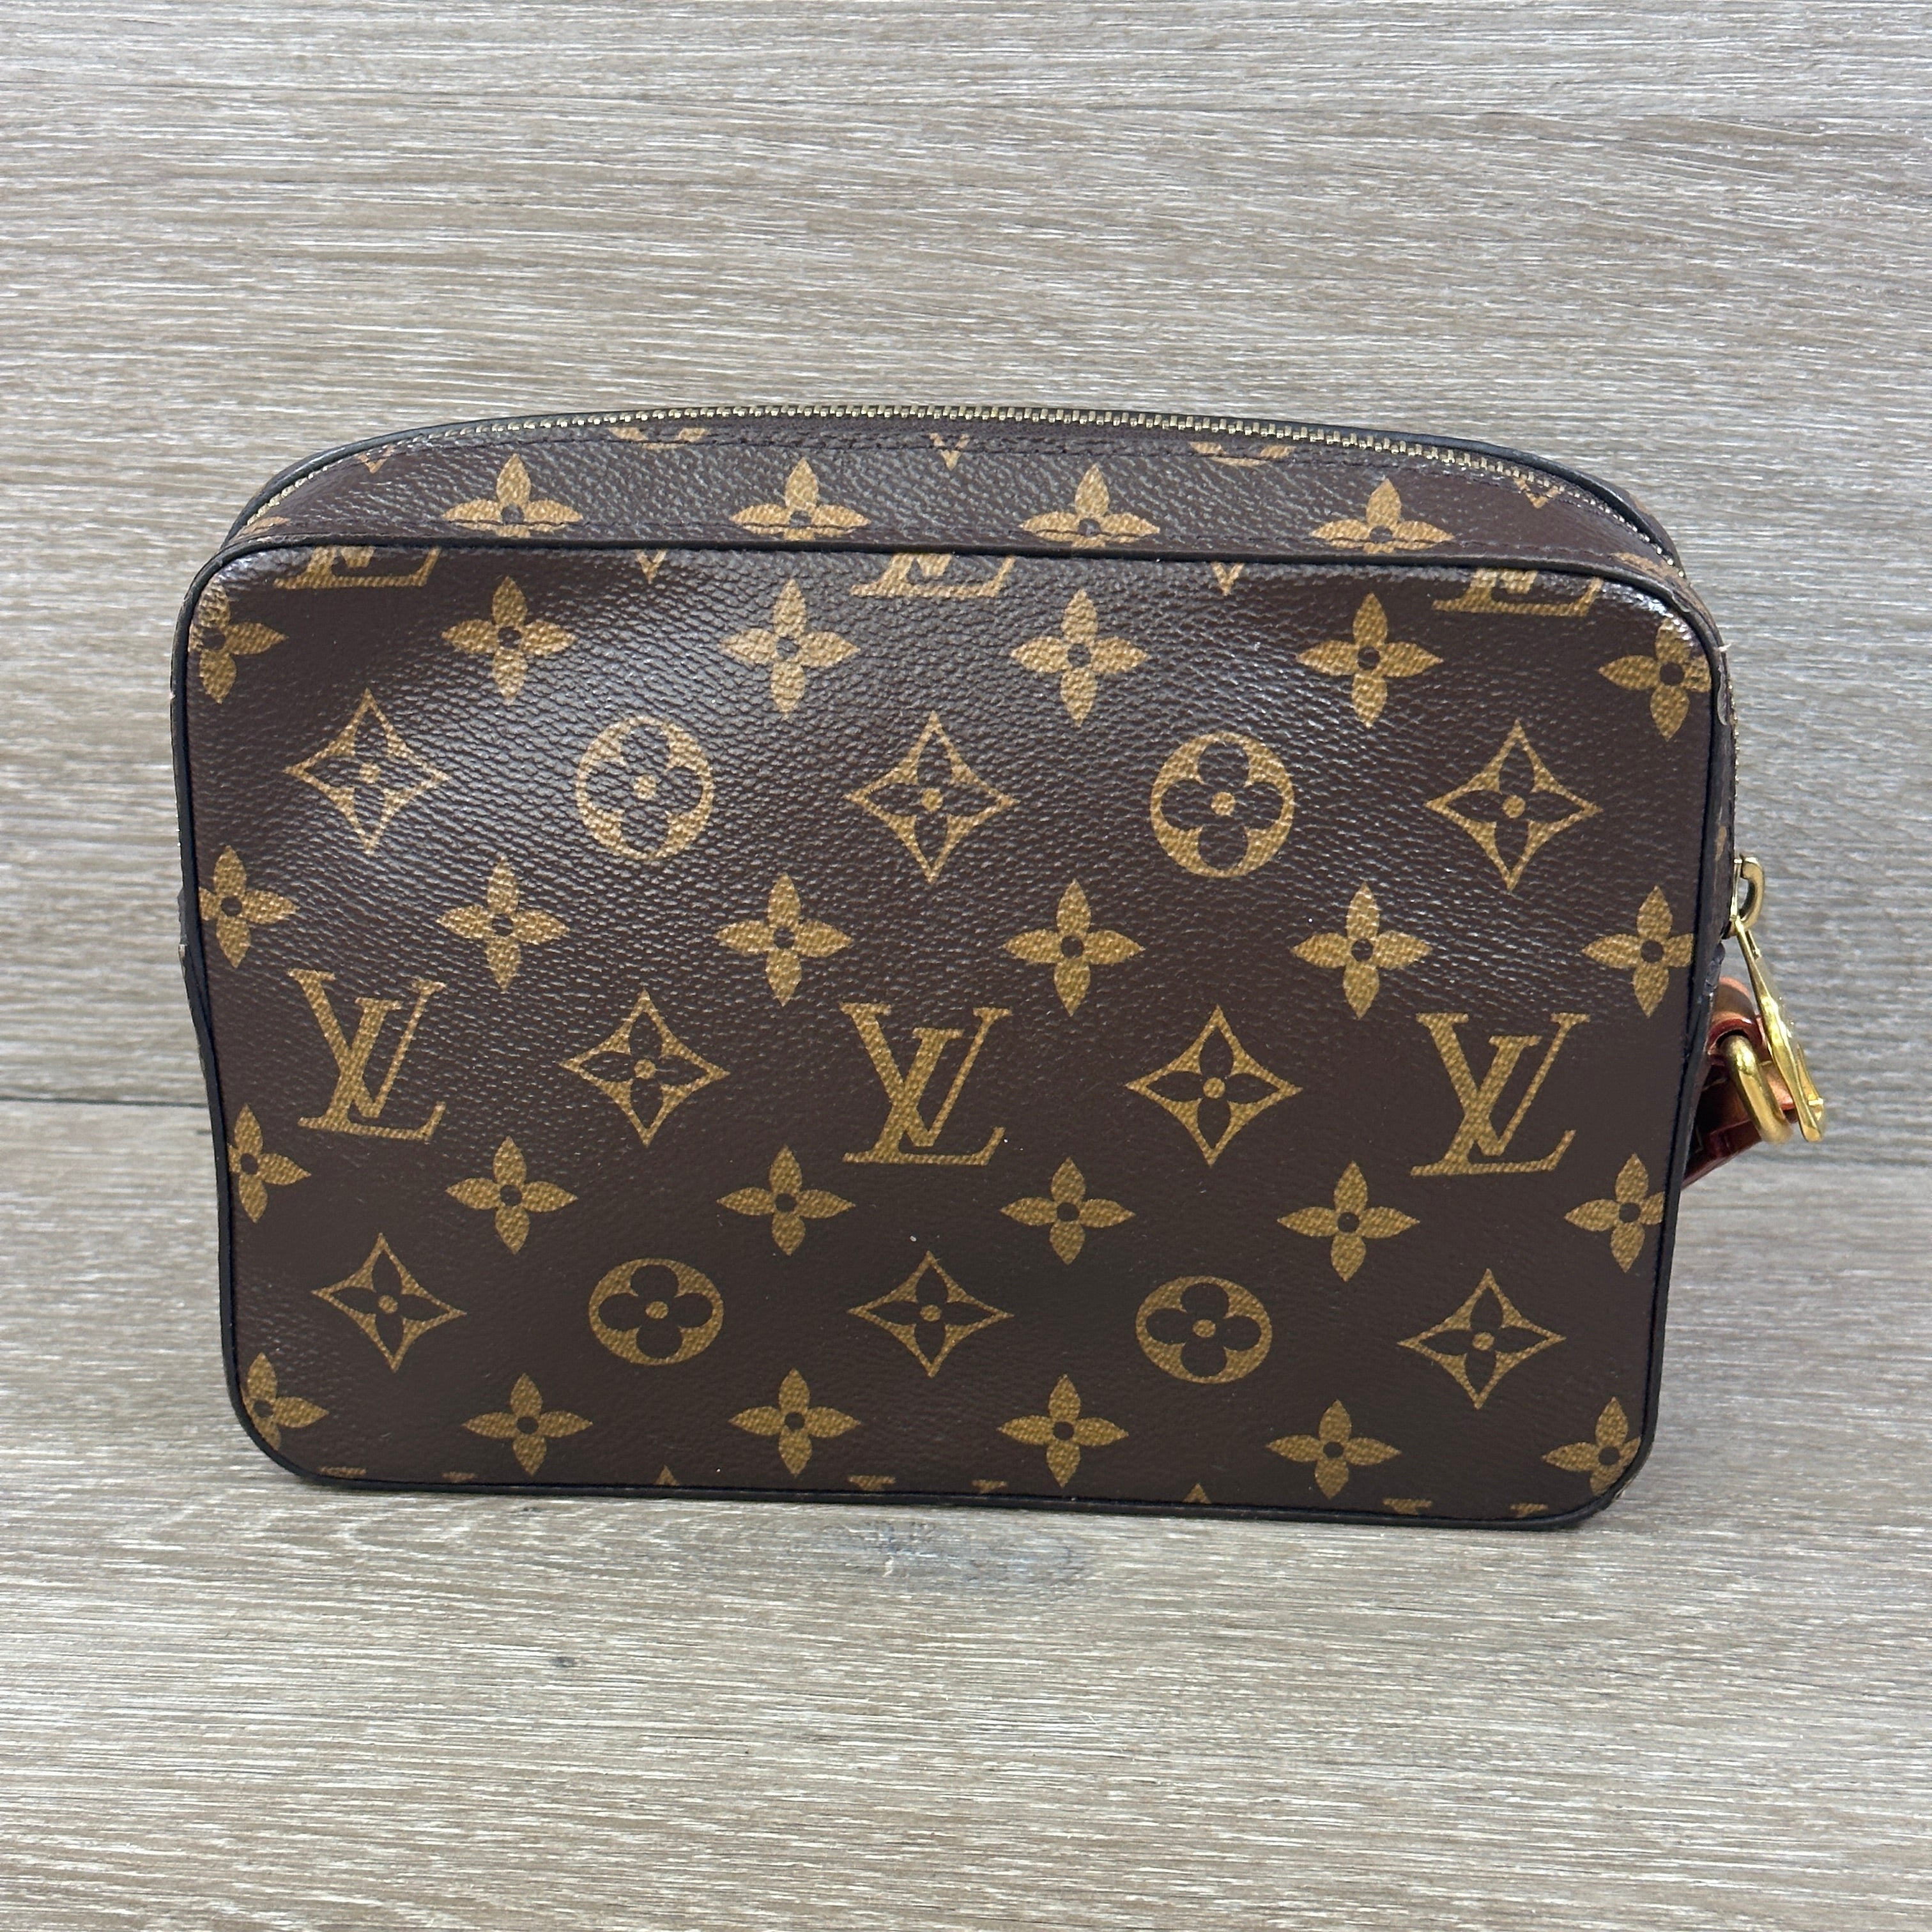 Vintage toiletry bag covered with LV monogram by Louis Vuitton, France